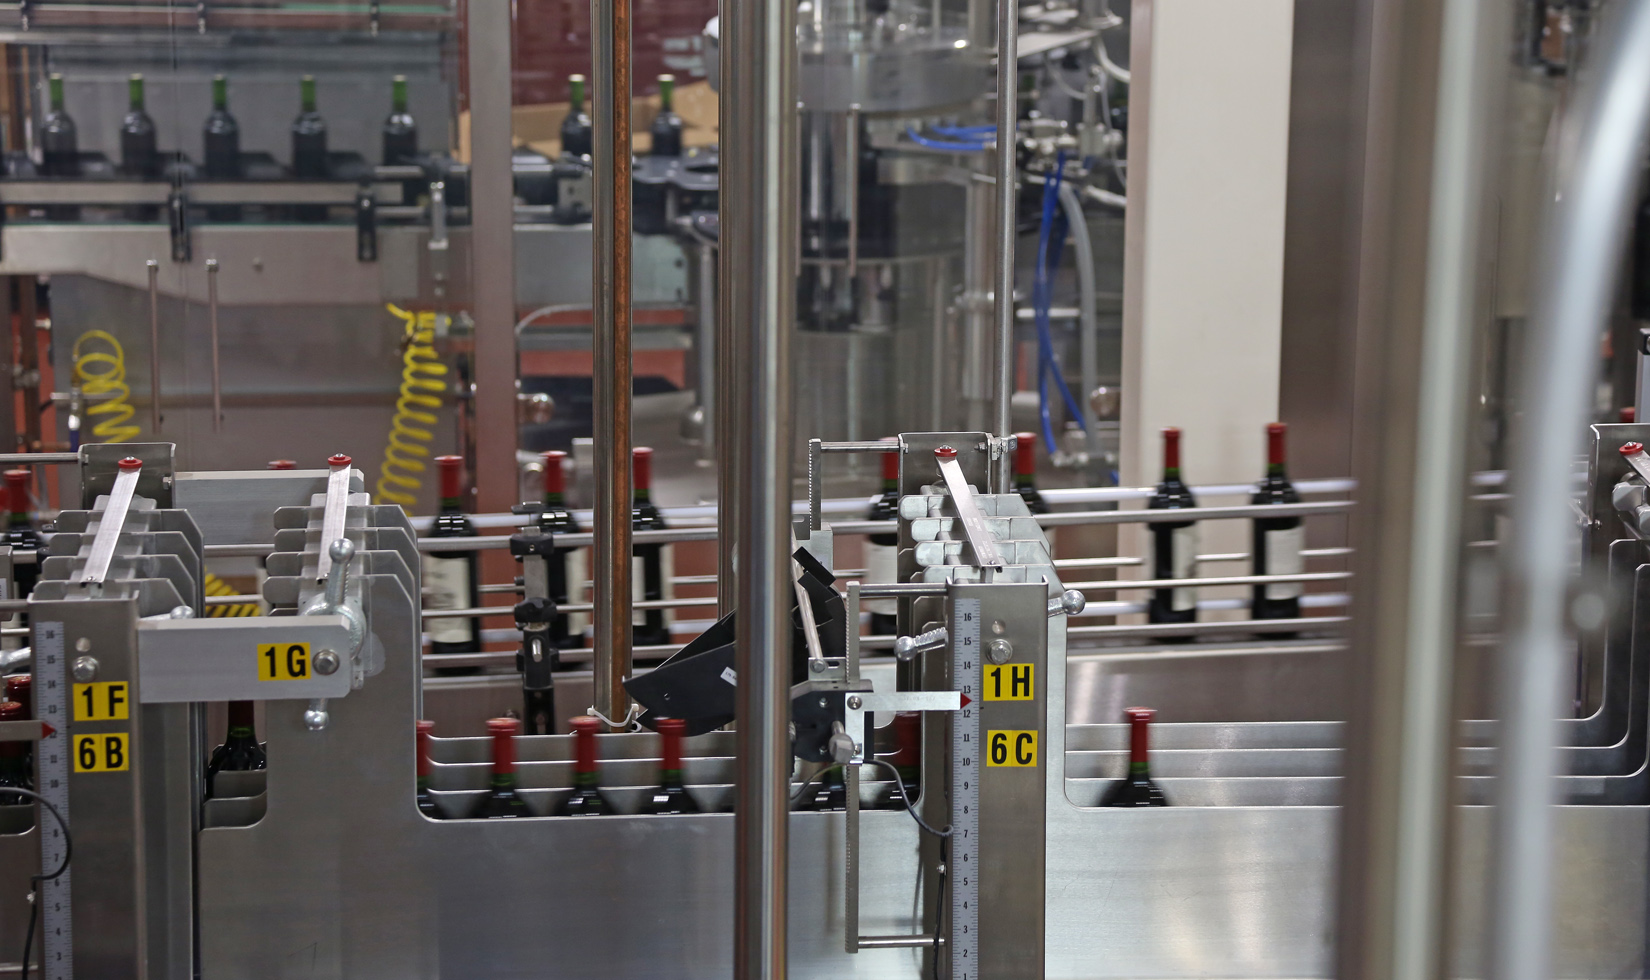 Bottles of red wine on the case packing conveyor. More bottles are being labeled in the background.